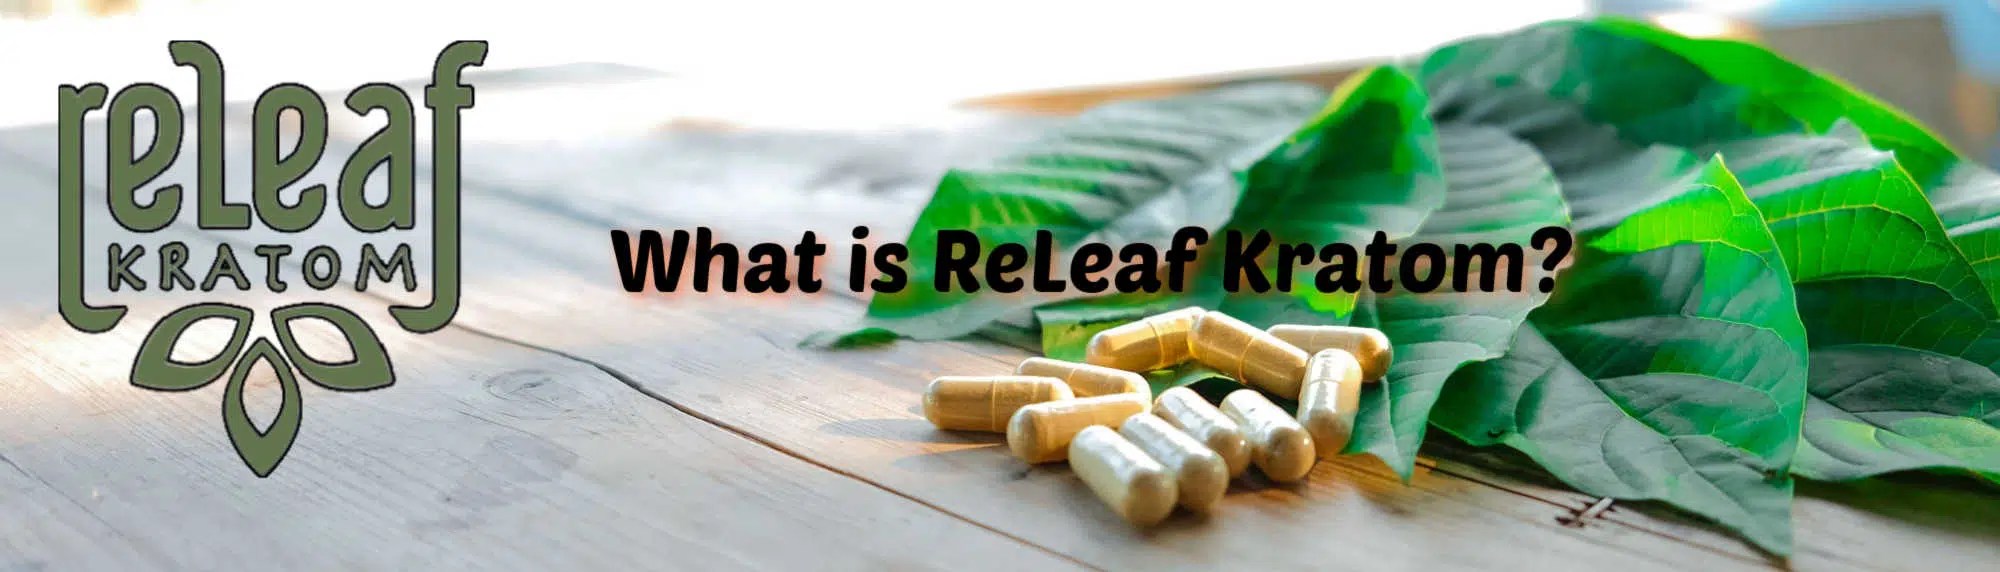 "what is releaf kratom" banner with company logo